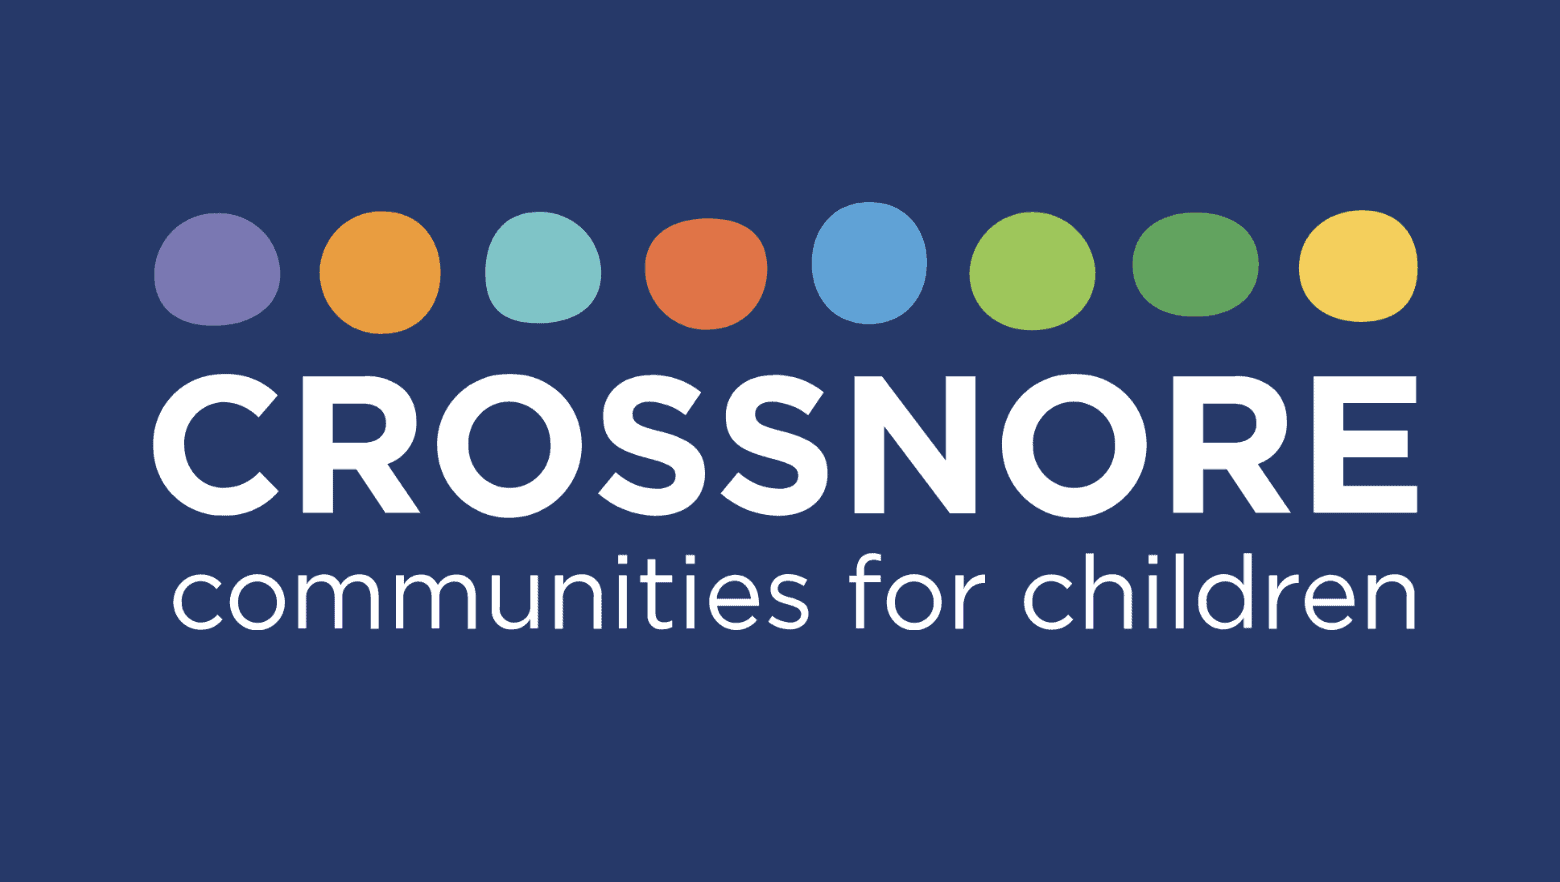 Crossnore Communities for Children Annual Report 2021 by Crossnore